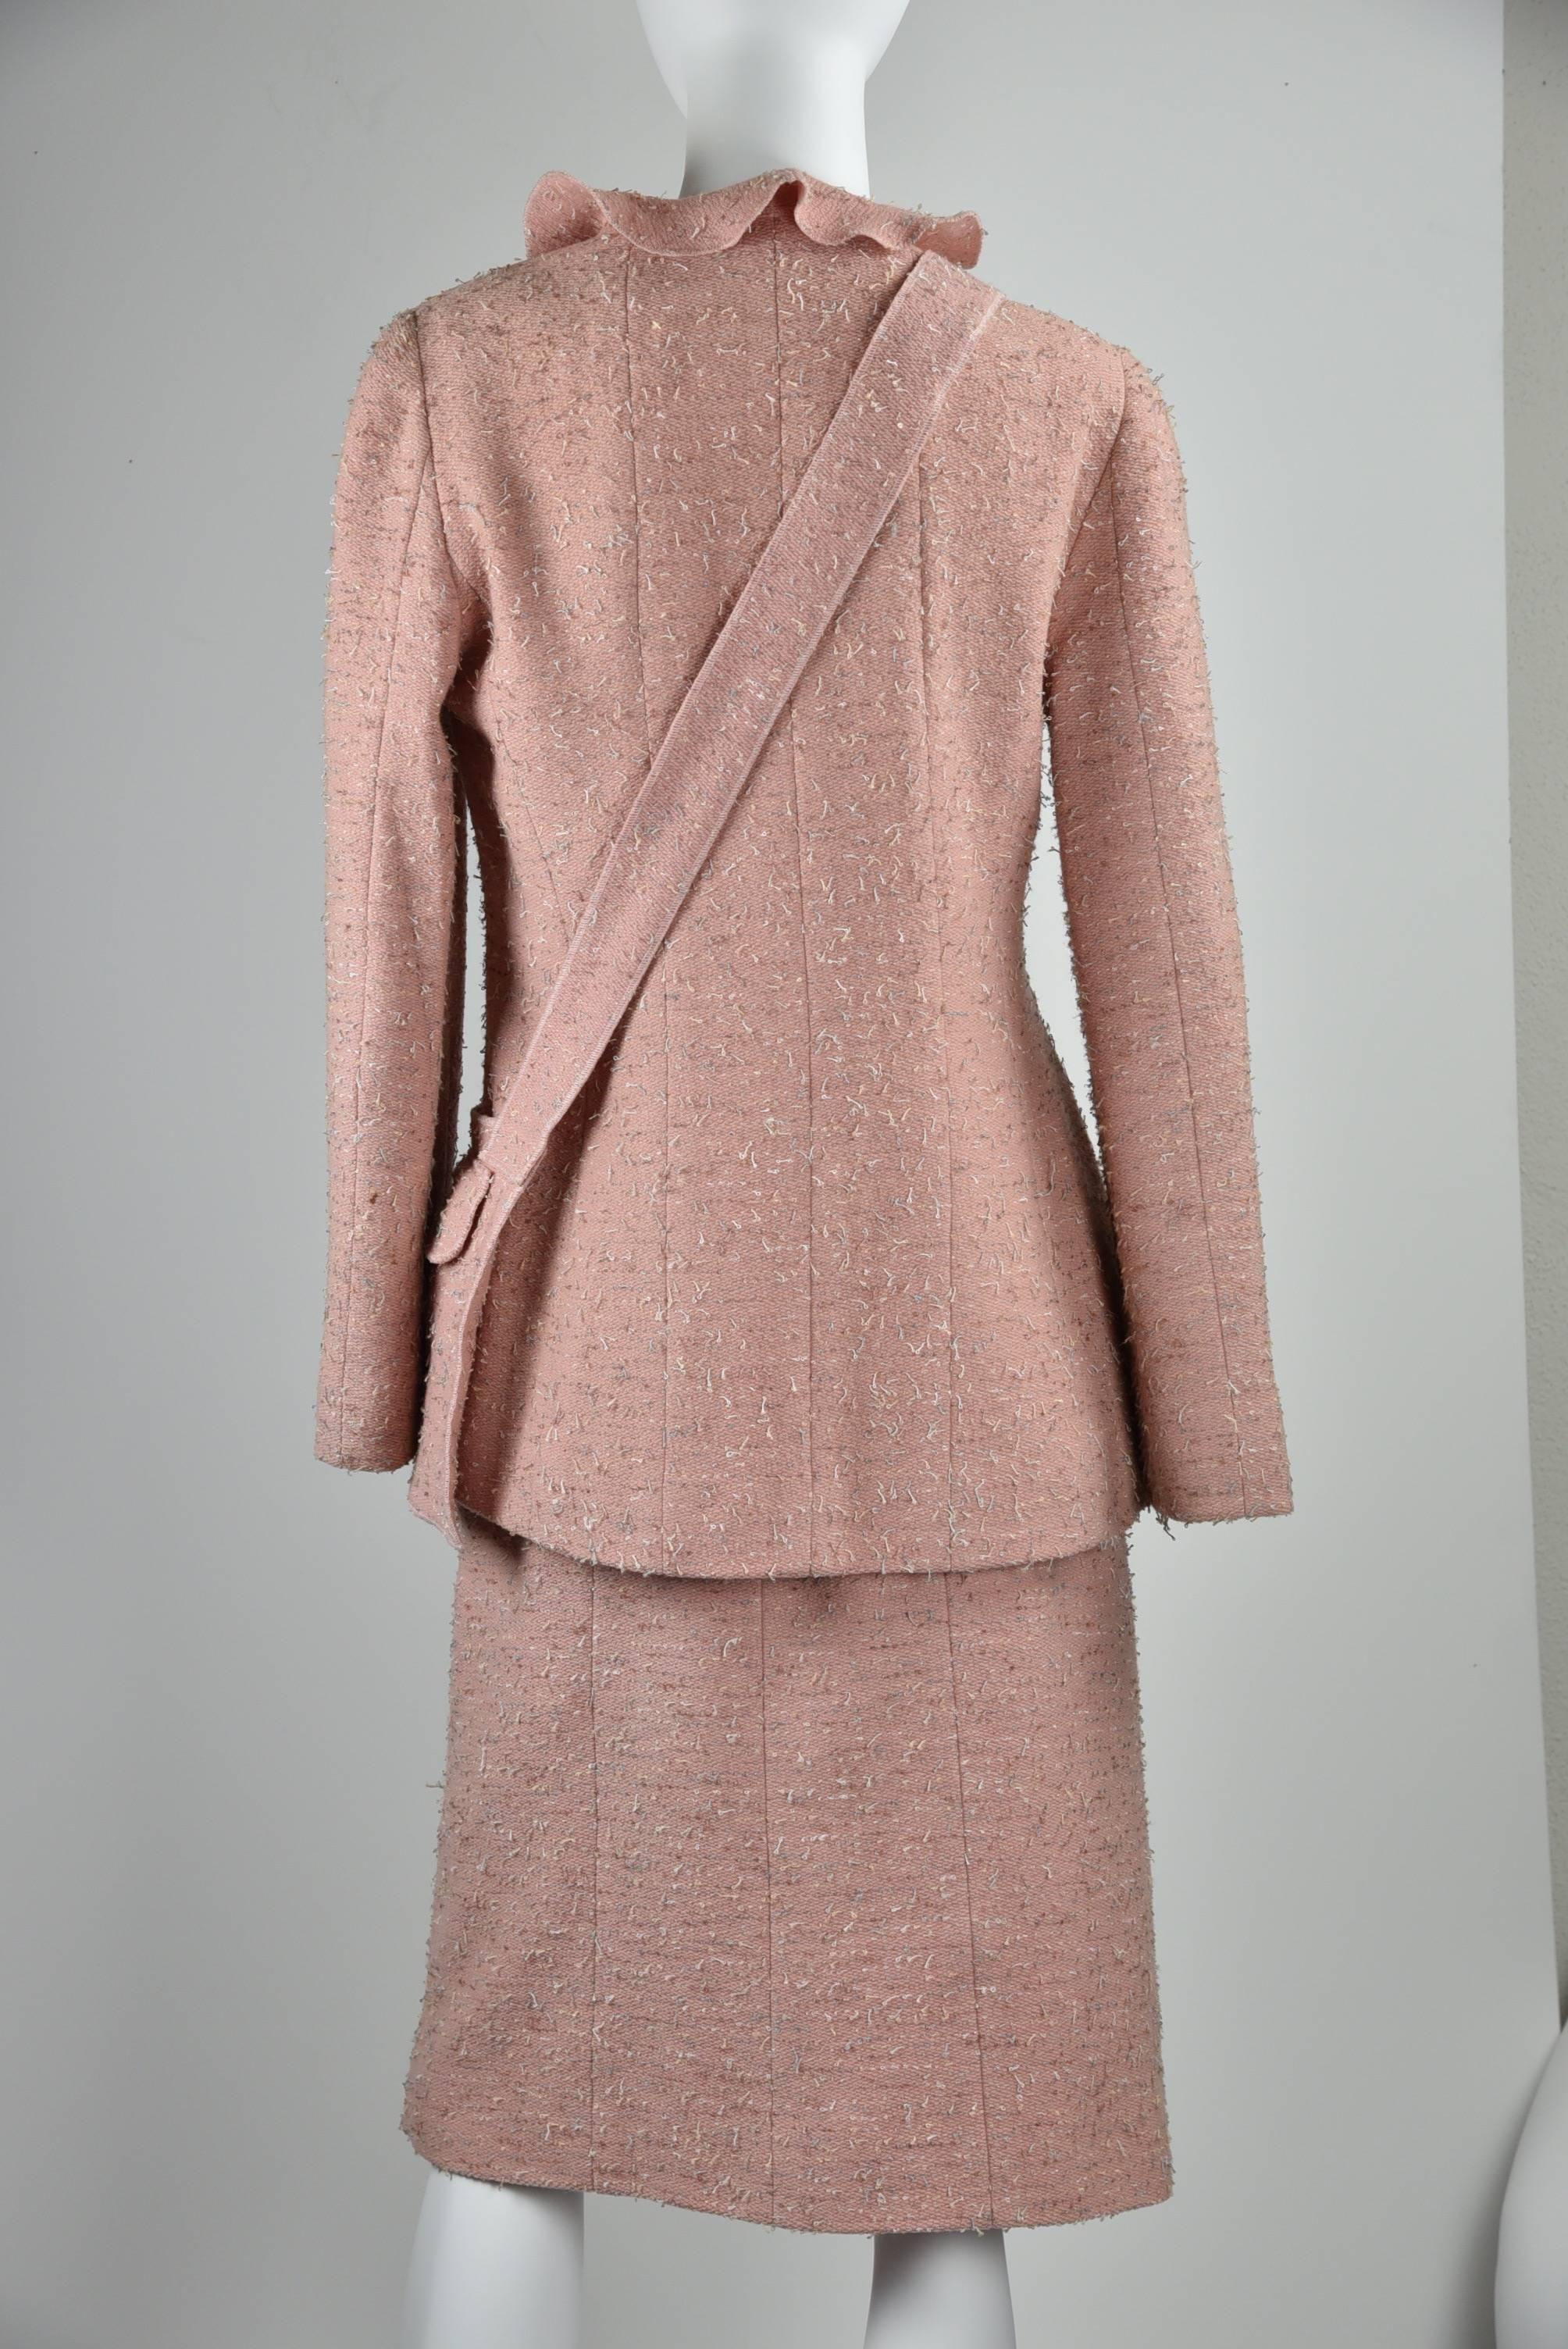 Chanel 1999A Pink Tweed Ruffled Suit Jacket & Skirt with Matching Pouch, FR 40 In Excellent Condition For Sale In Portland, OR